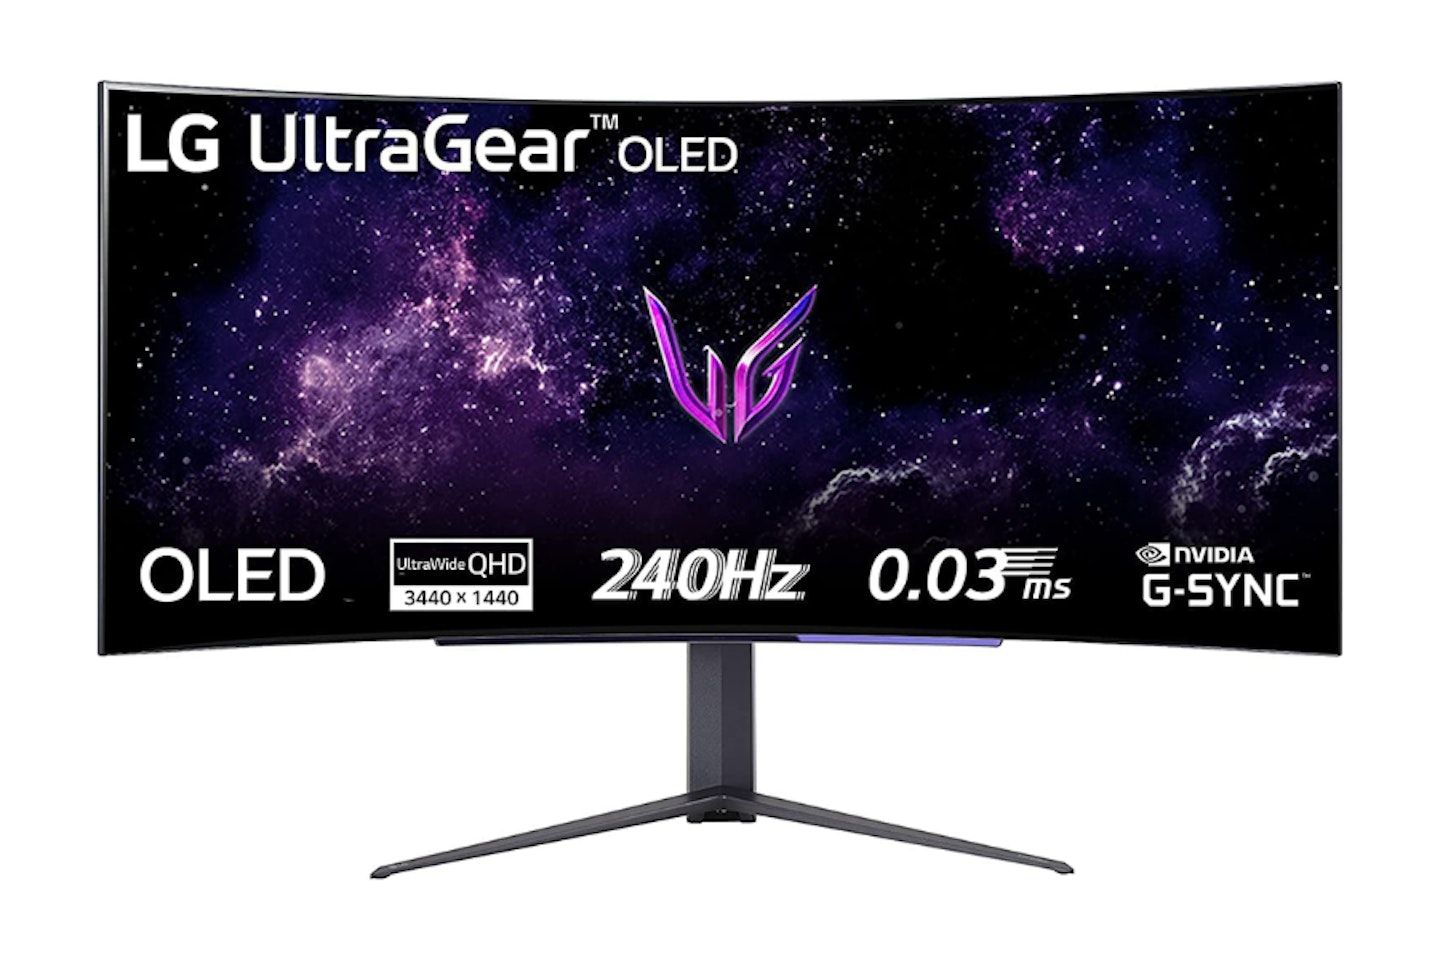 LG UltraGear 45GR95QE - 45 Inch Curved OLED Gaming Monitor - one of the Best monitors for PS5